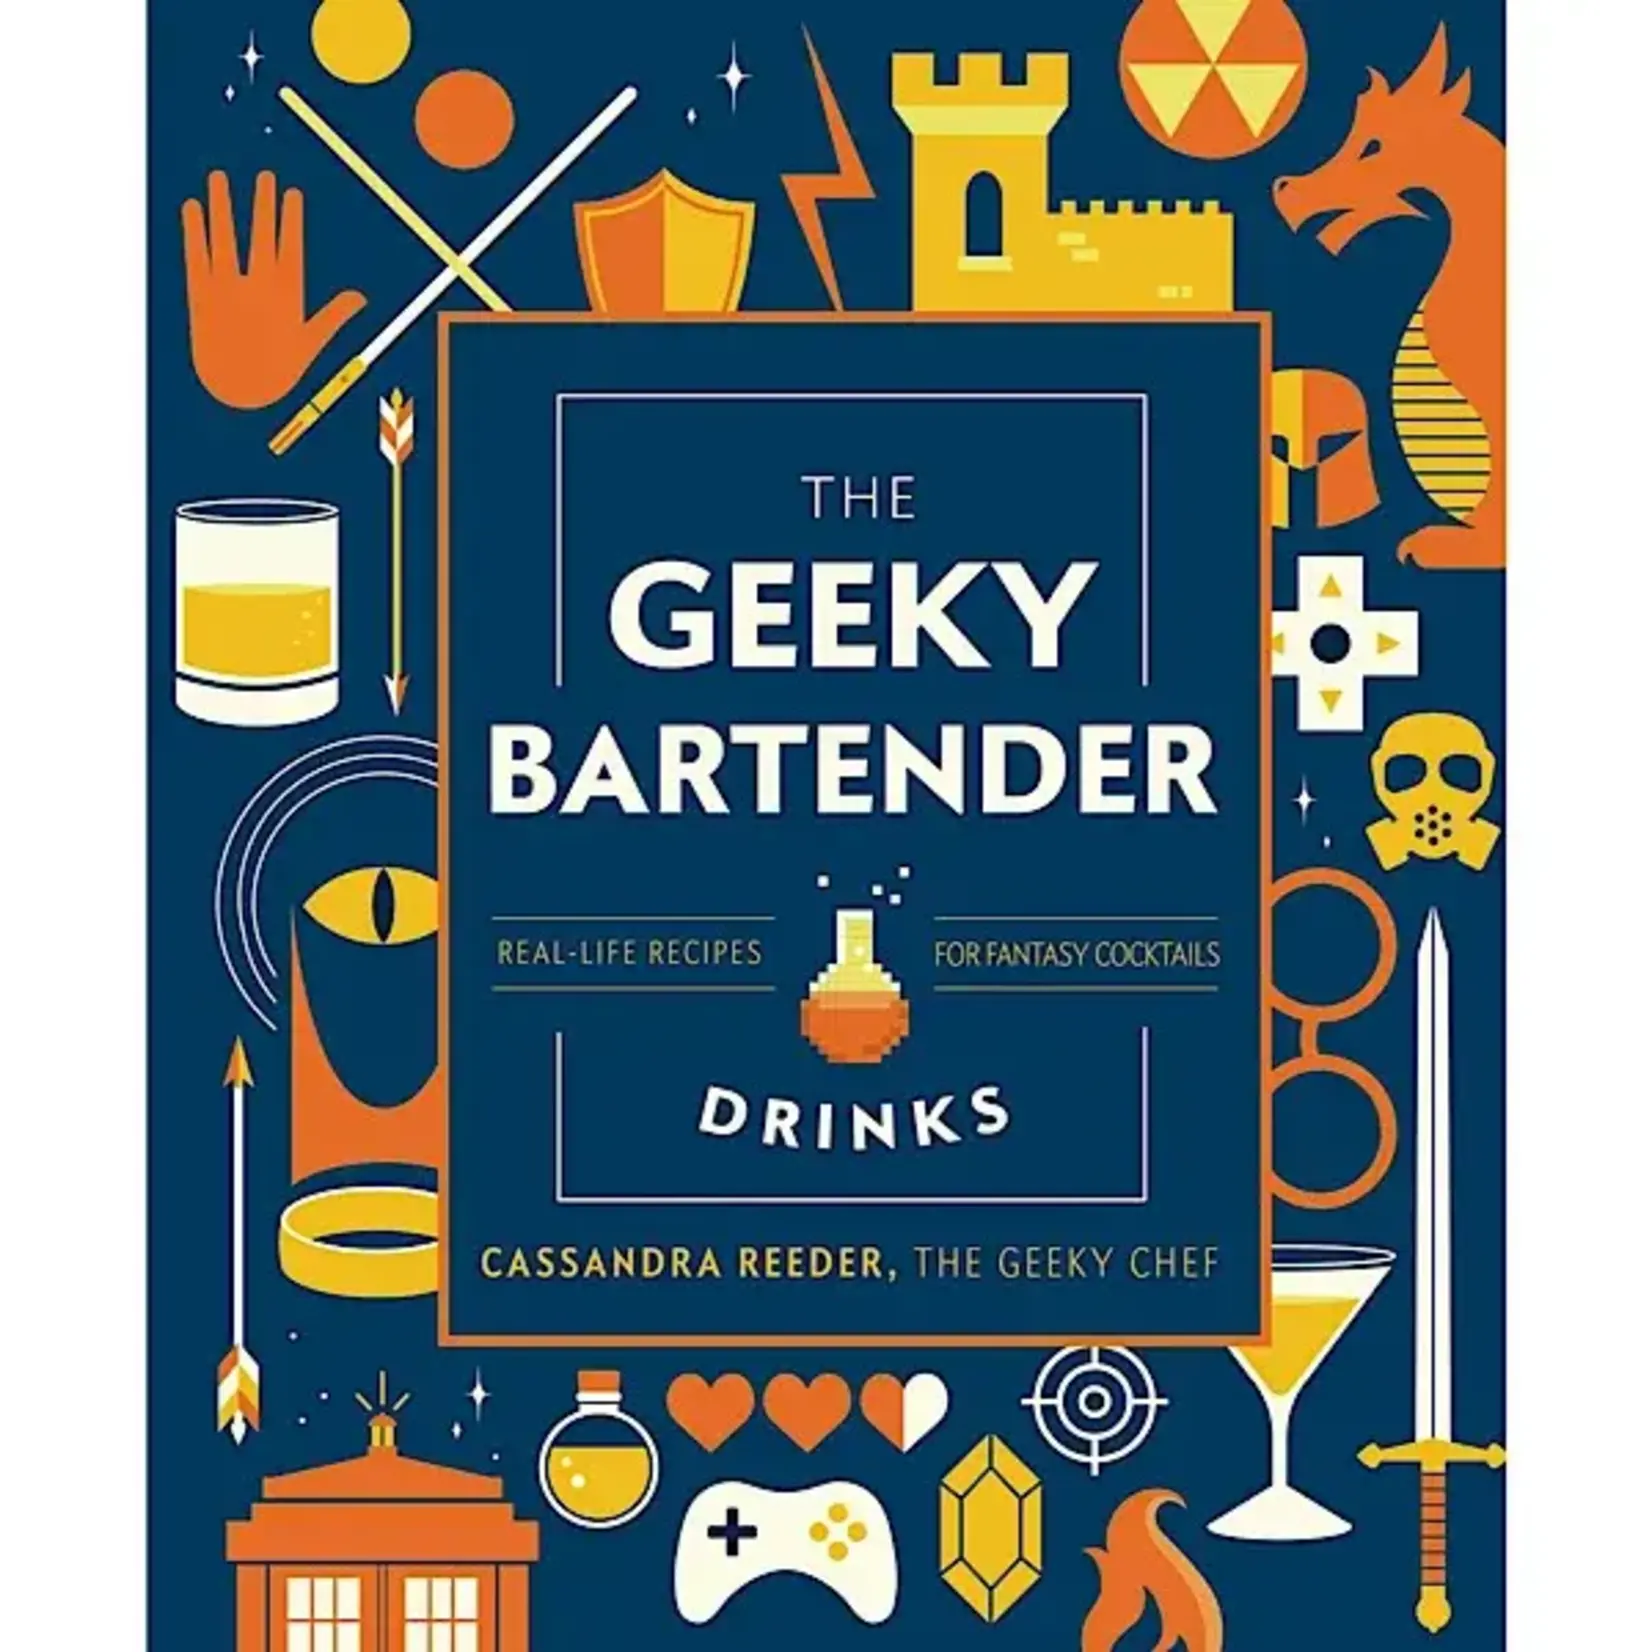 Book - The Geeky Bartender Drinks. Real Life Recipes For Fantasy Cocktails